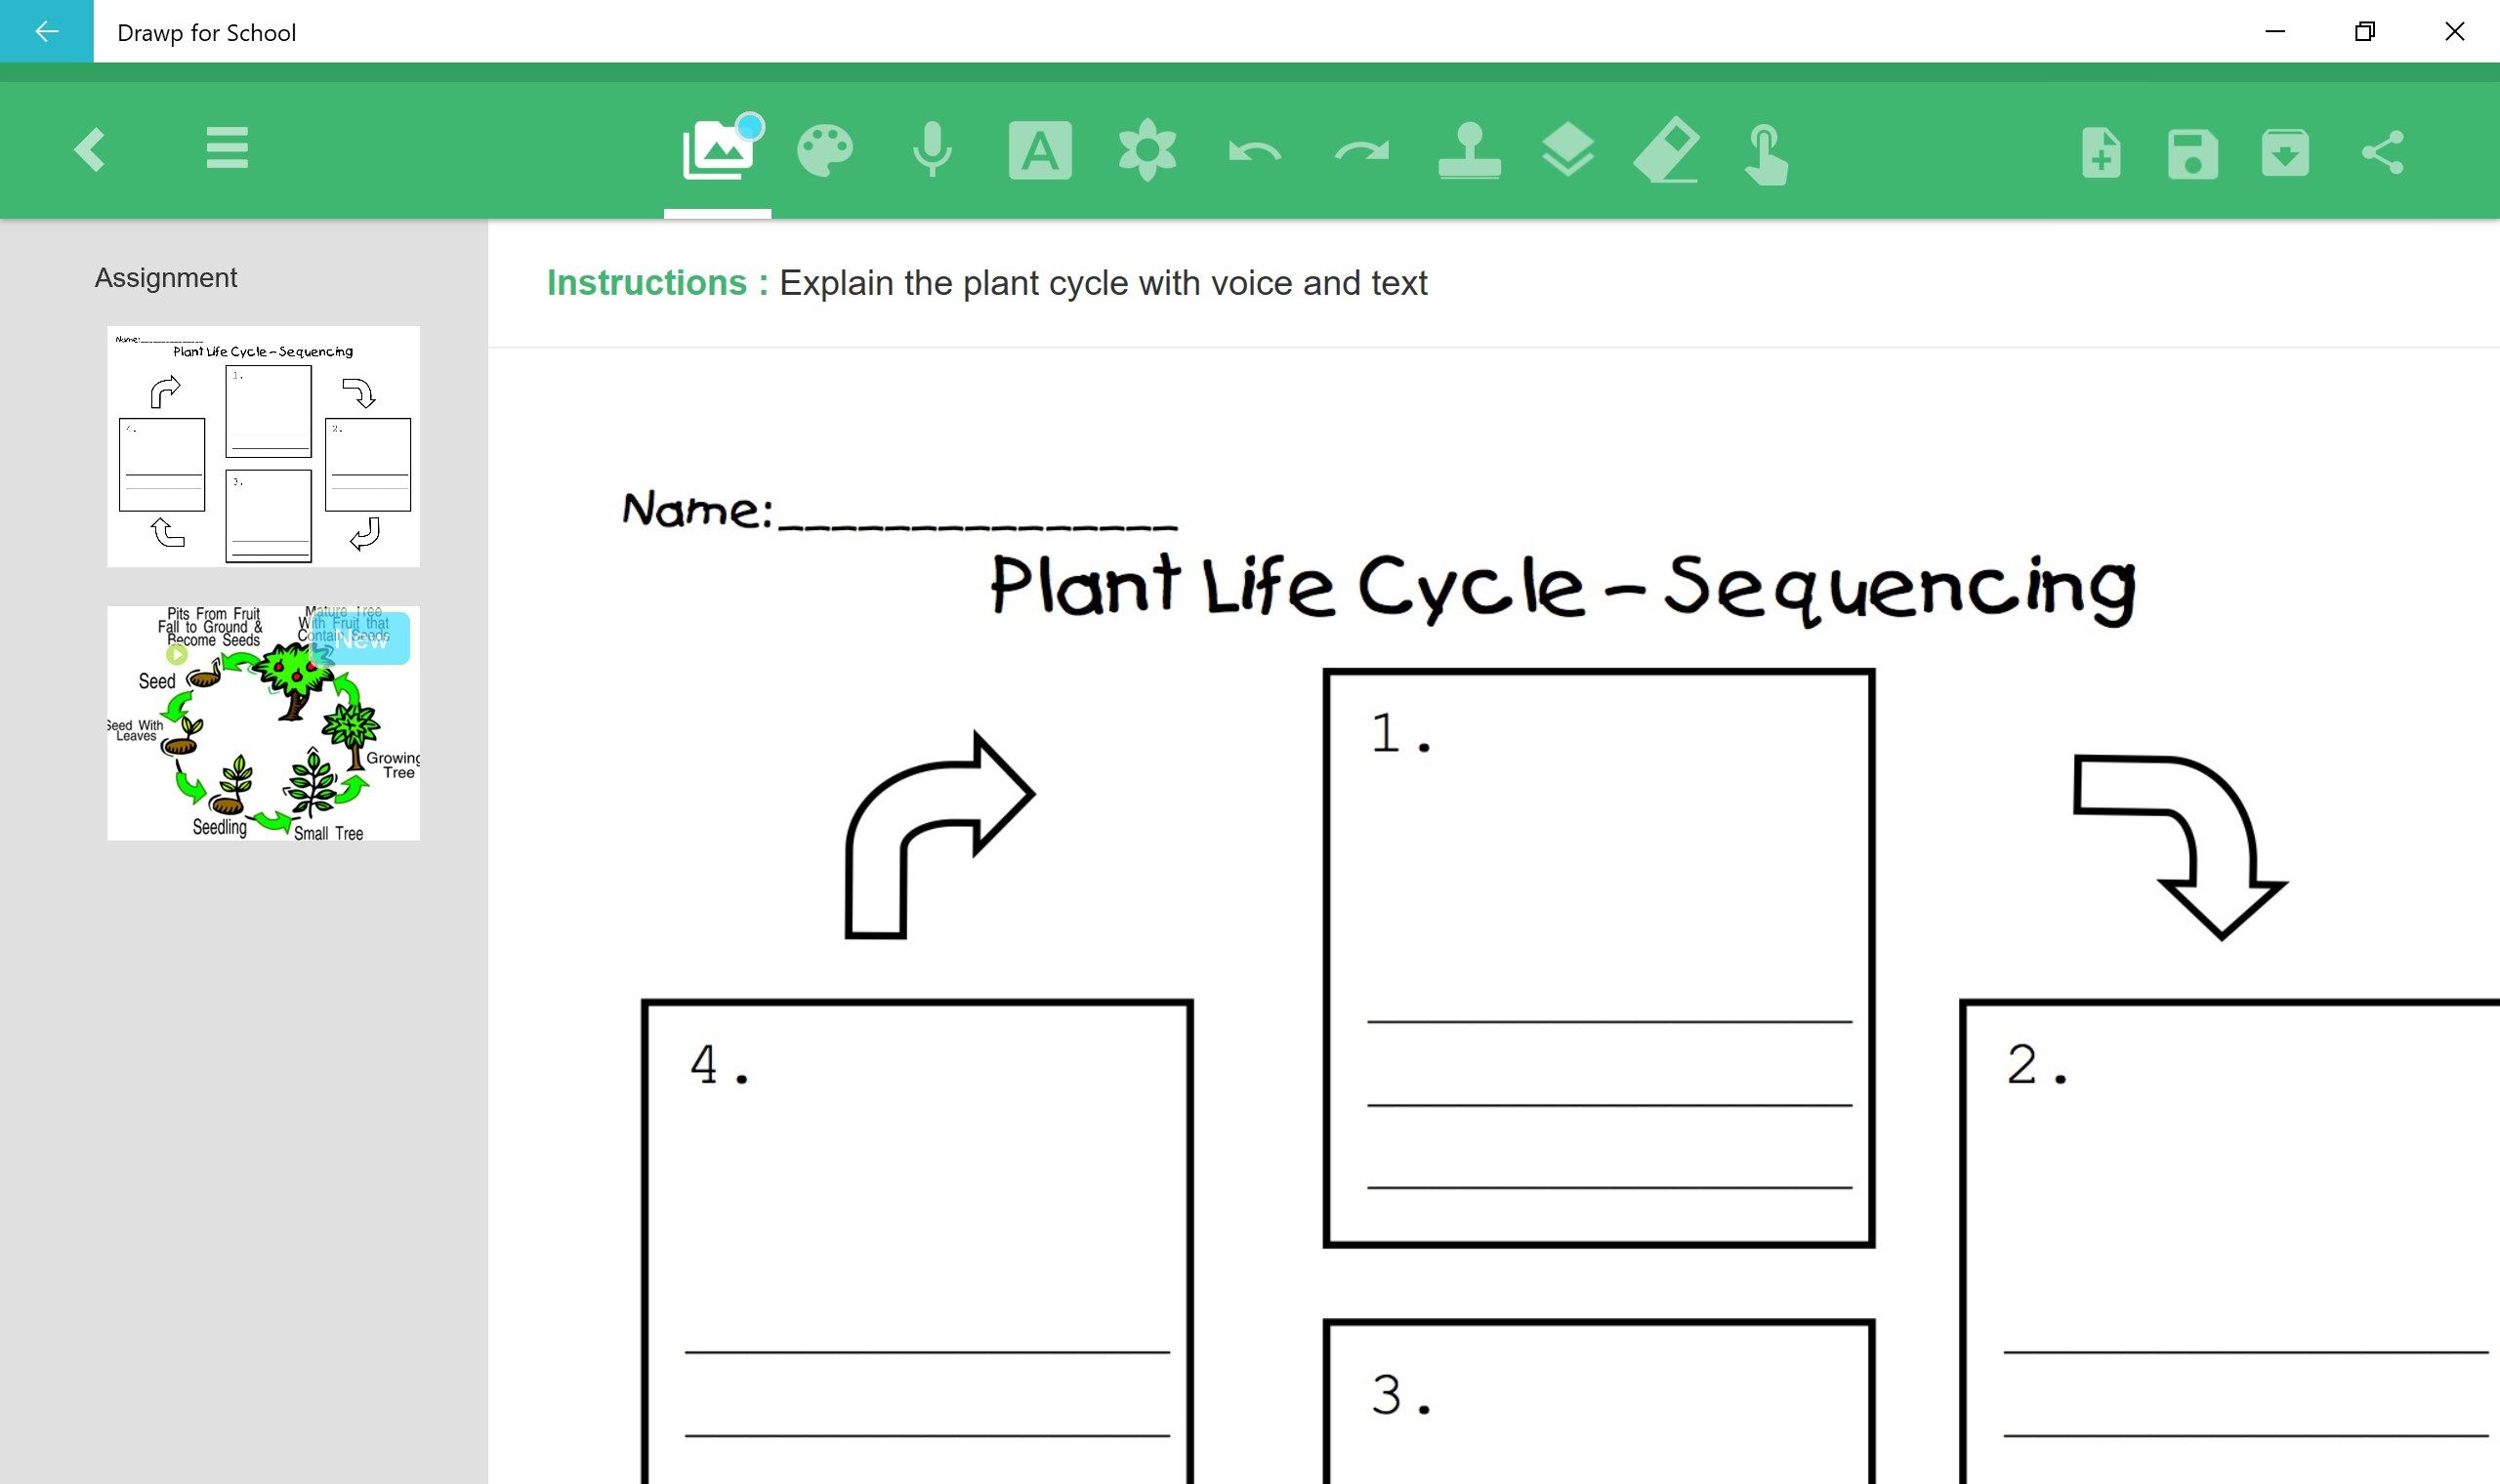 Students use Drawp’s creativity tools to add drawings, voice recordings, text and photos to assignments